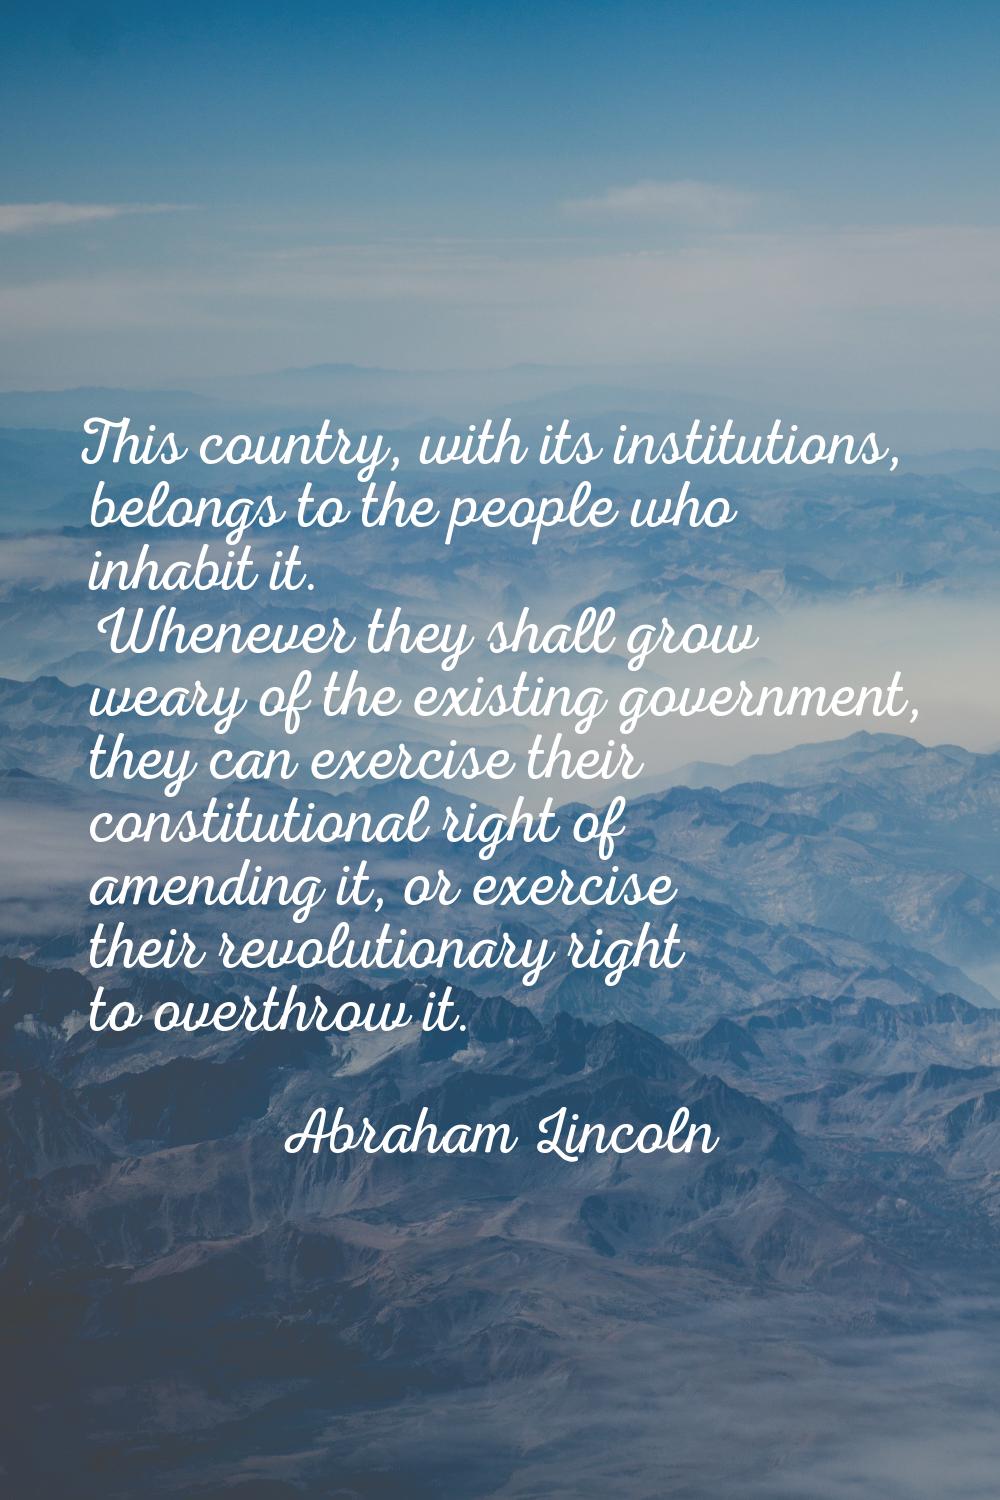 This country, with its institutions, belongs to the people who inhabit it. Whenever they shall grow